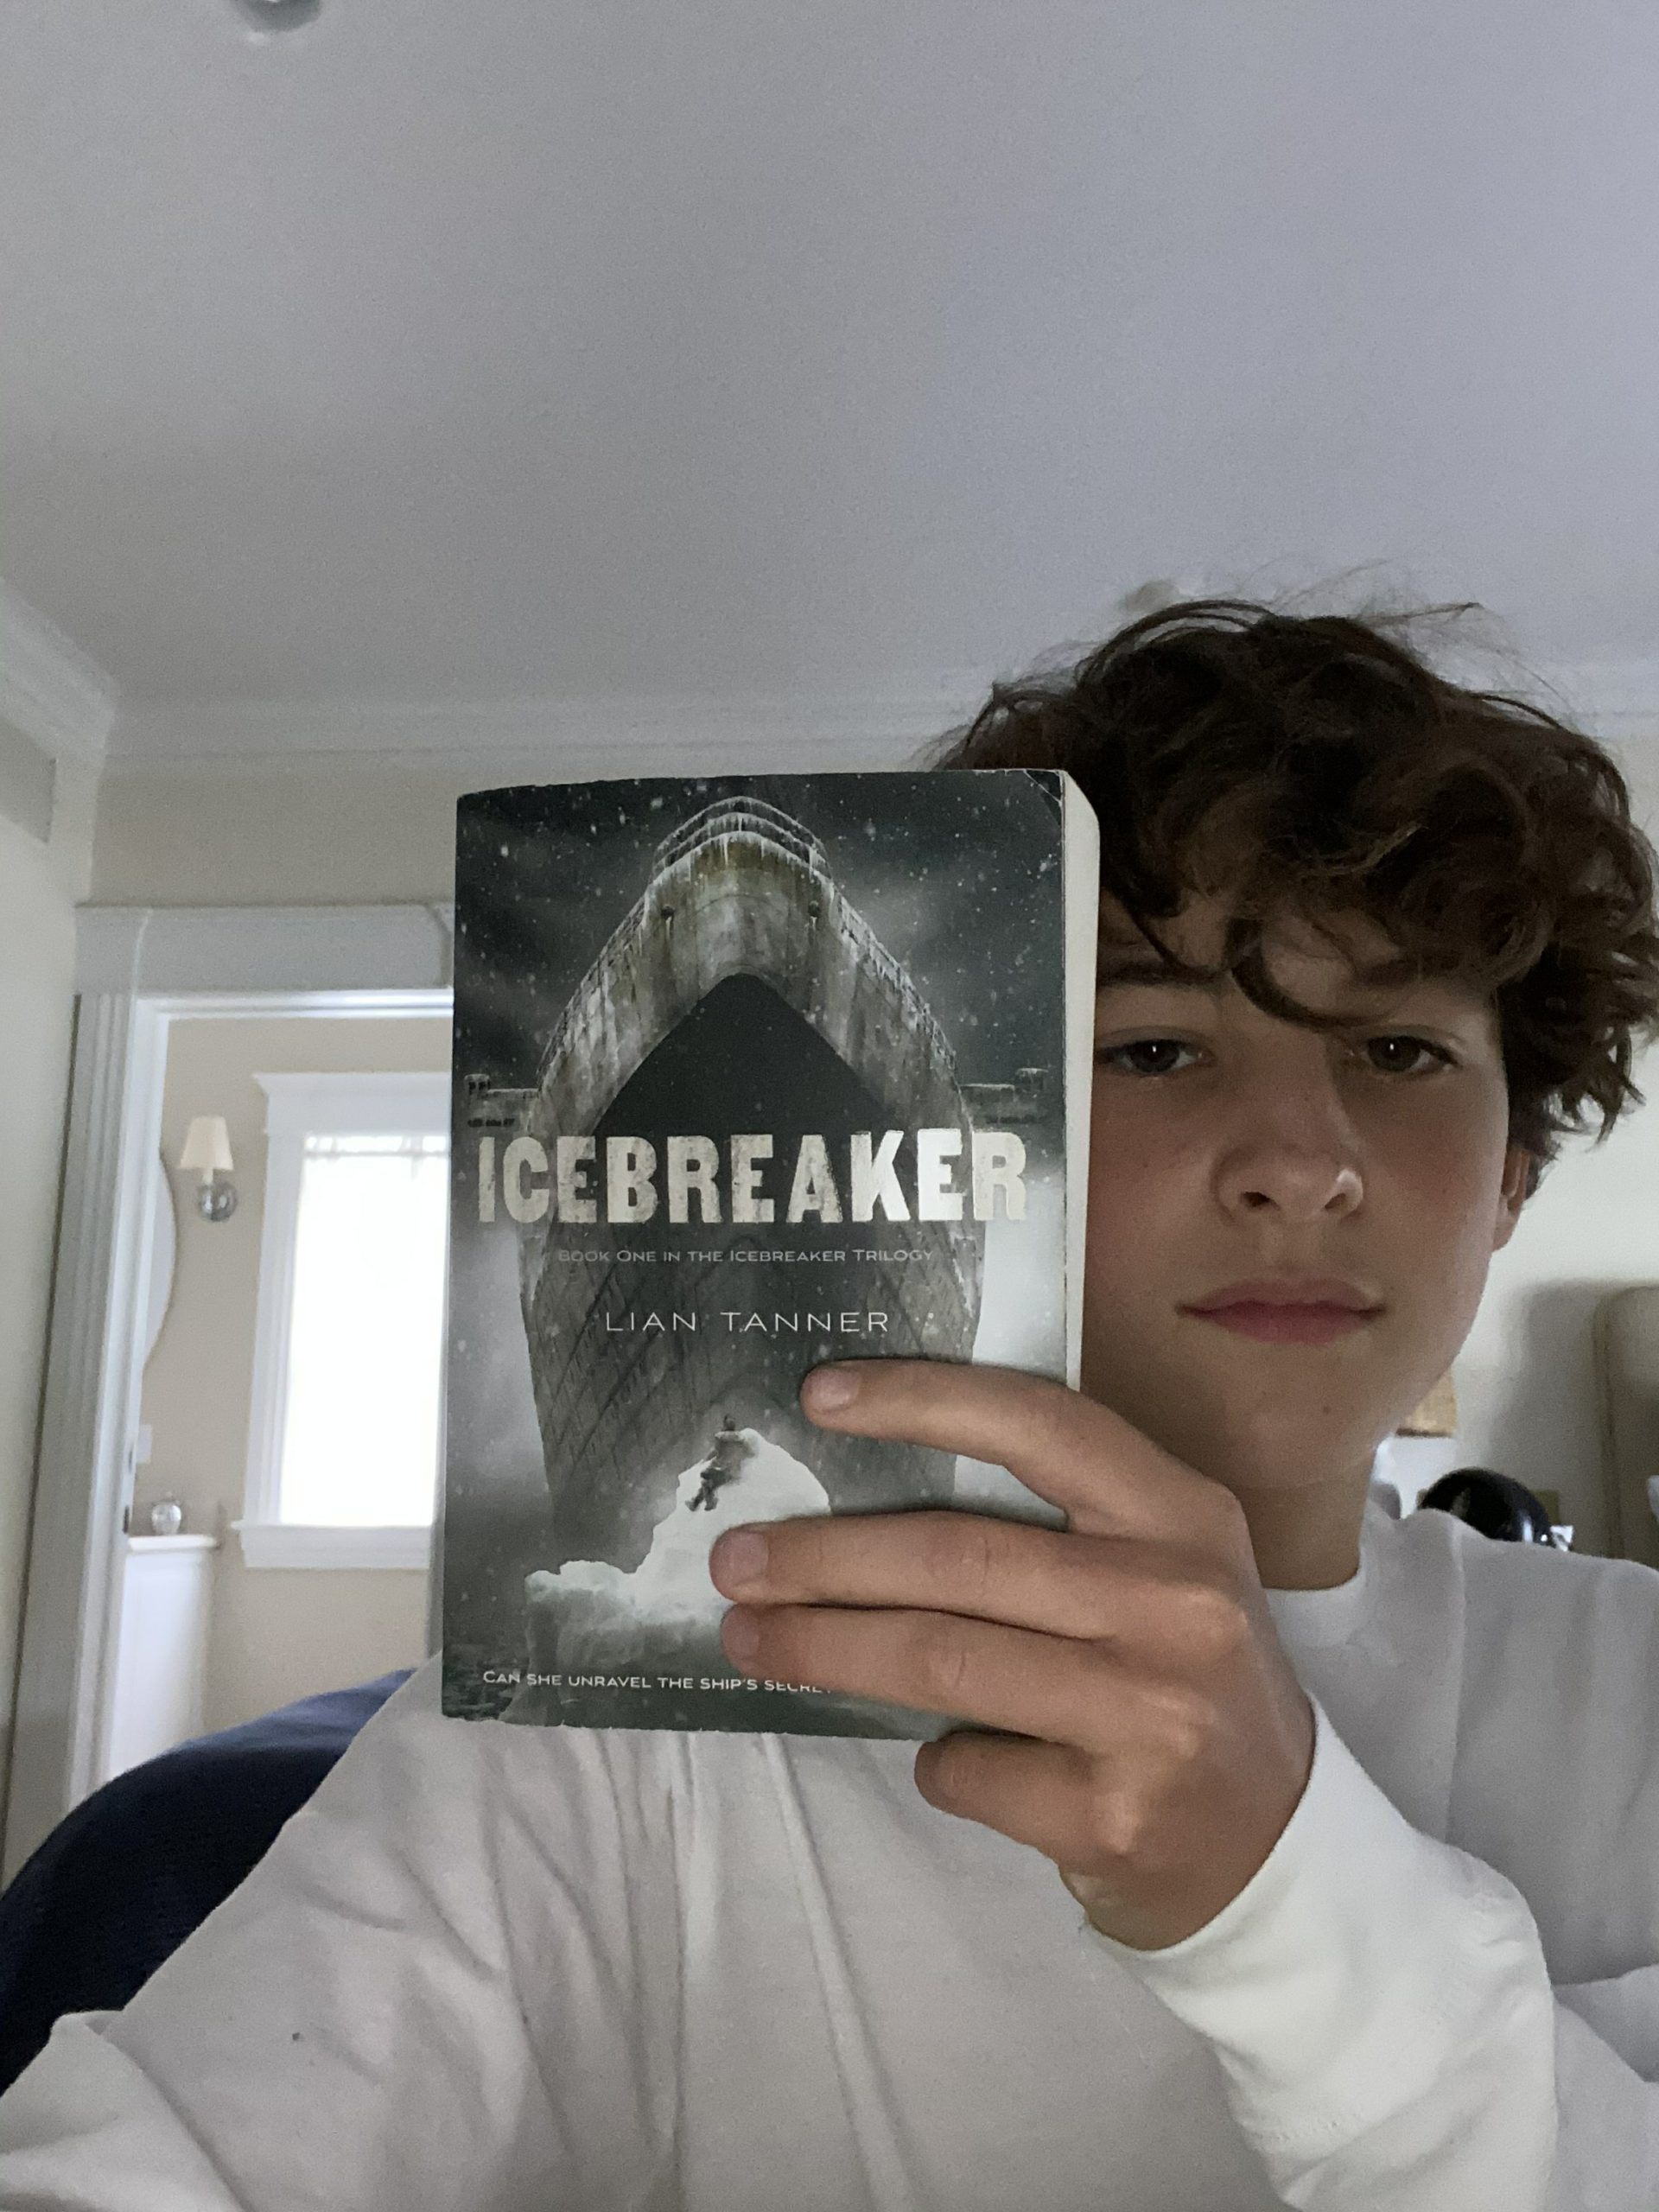 Westhampton Beach Middle School student Alexandre Schroeder wrote to and received a letter back from “Icebreaker” author Lian Tanner. 